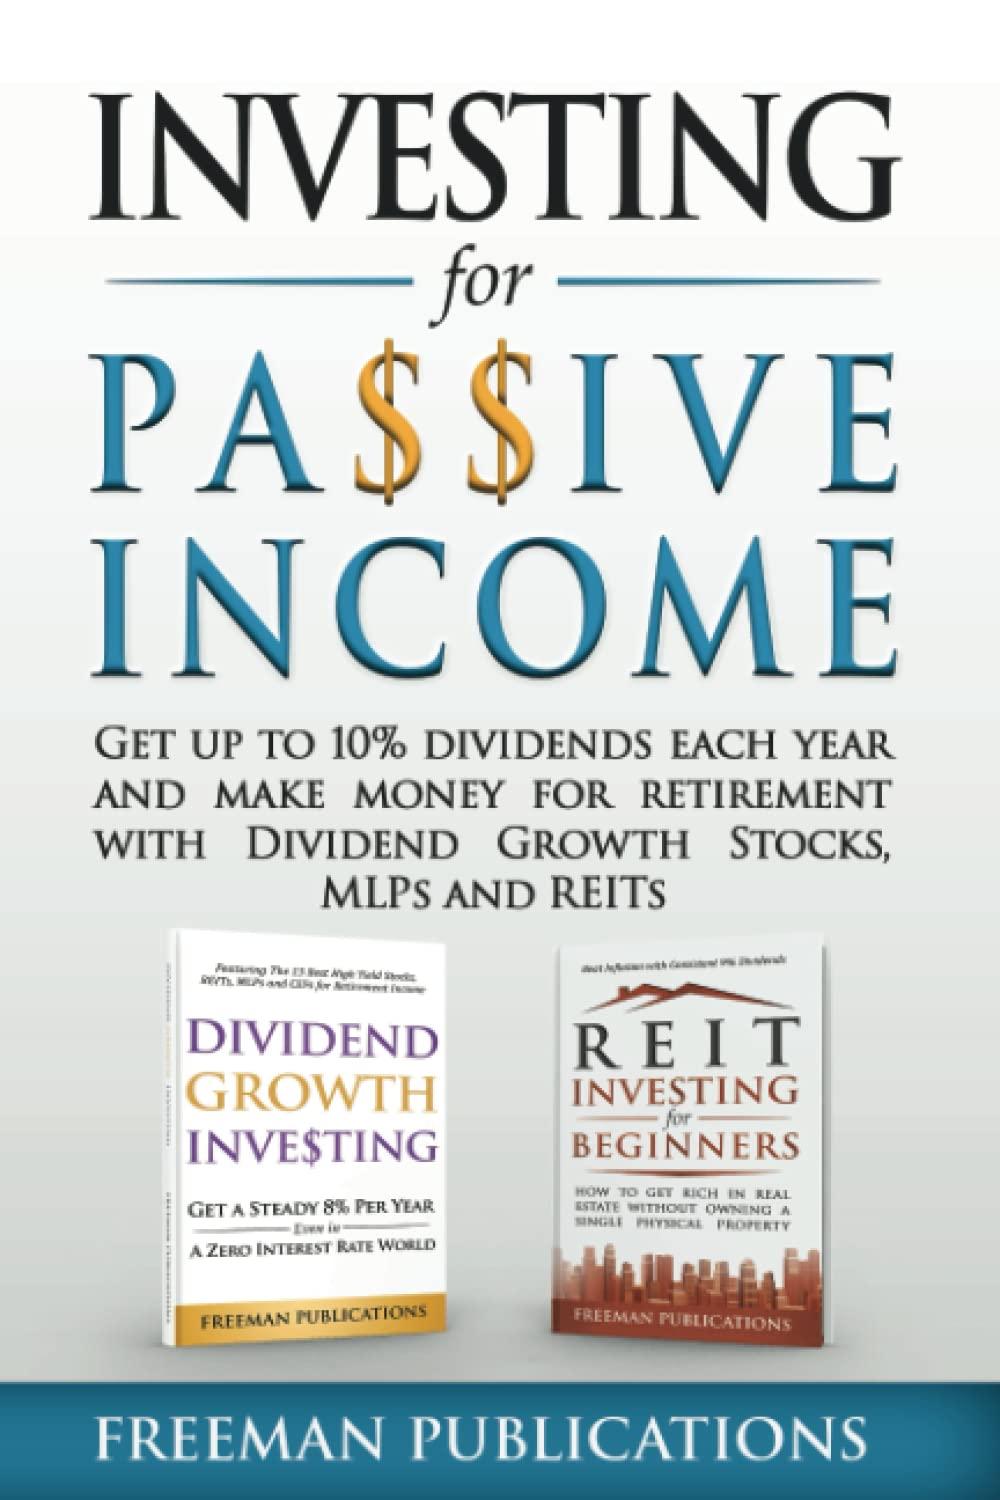 investing for passive income get up to 10% dividends each year and make money for retirement with dividend